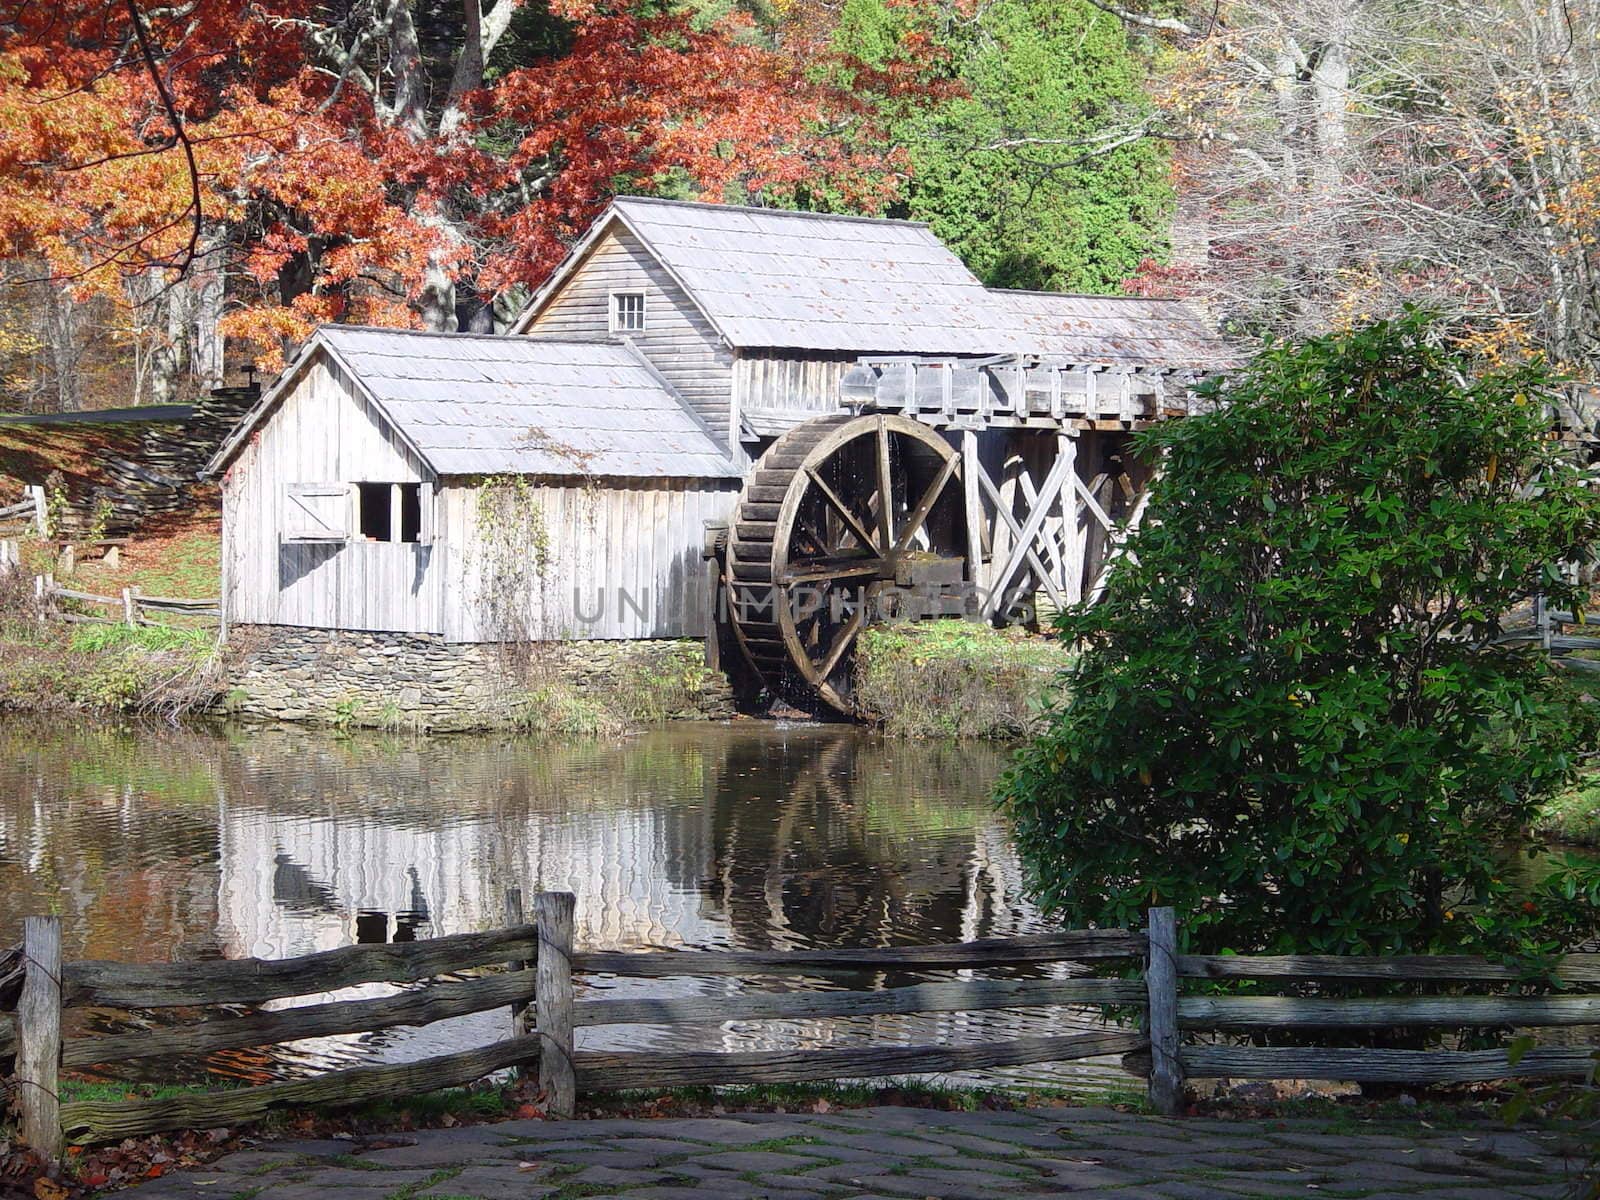 On old Appellation mill on the Blue Ridge Parkway in the fall.